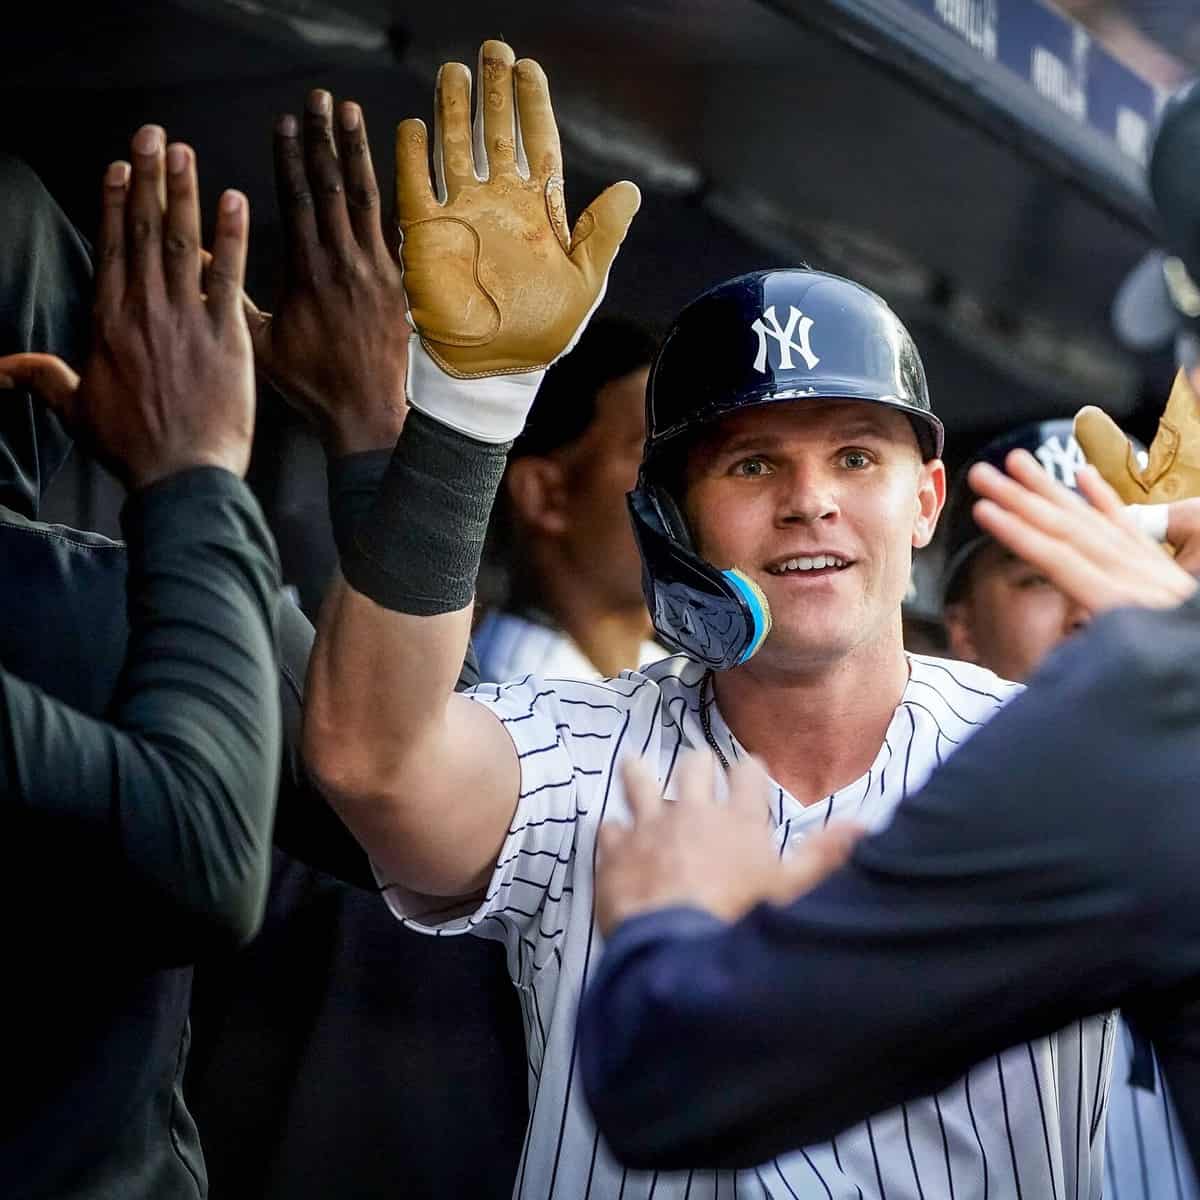 Mariners manage only 4 hits in 4-2 loss to Yankees